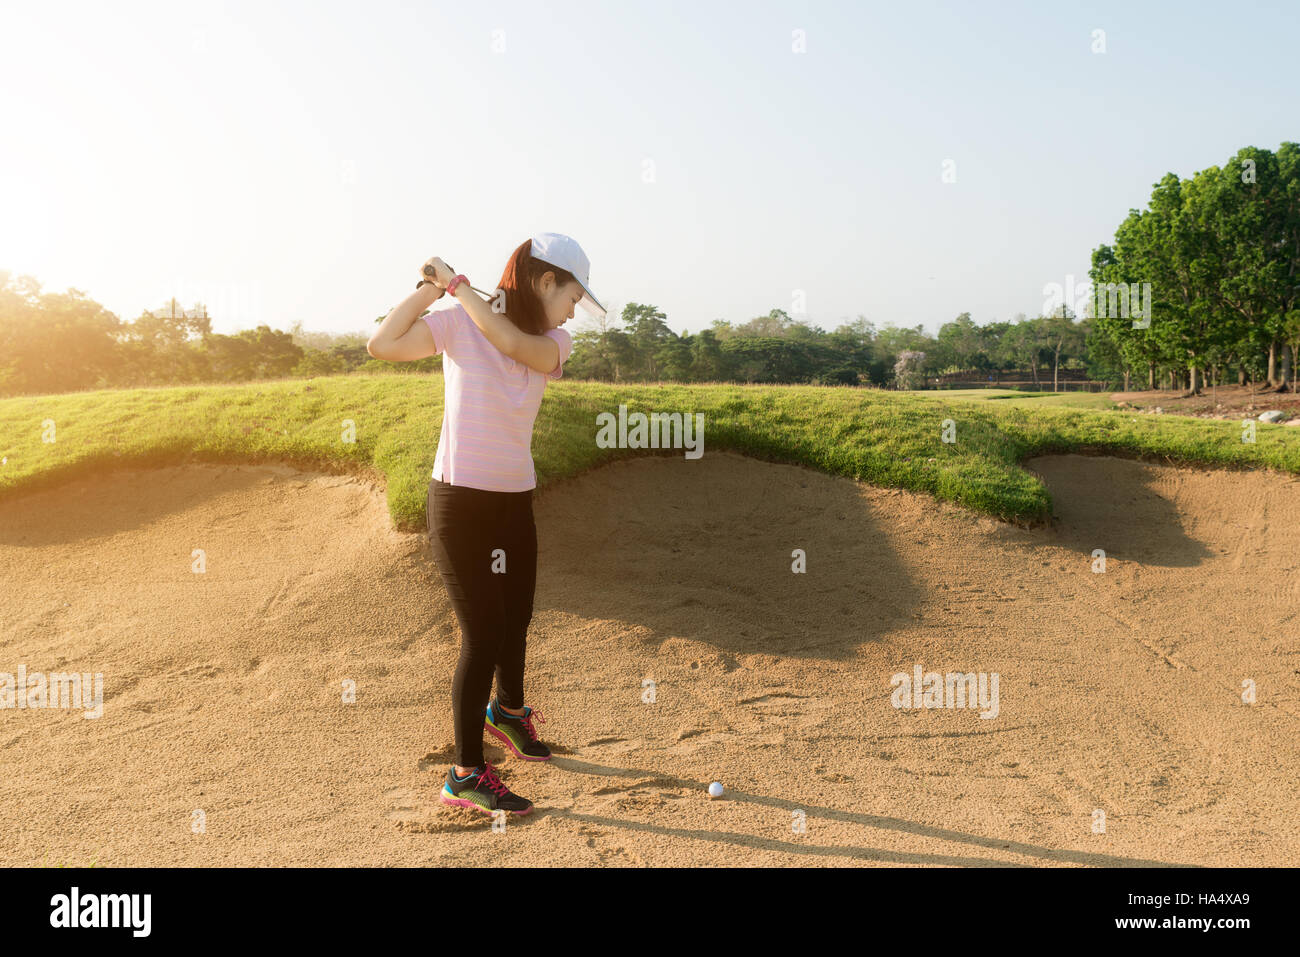 Asian woman golf player hitting golf ball out of sand trap. Golf sport concept. Stock Photo